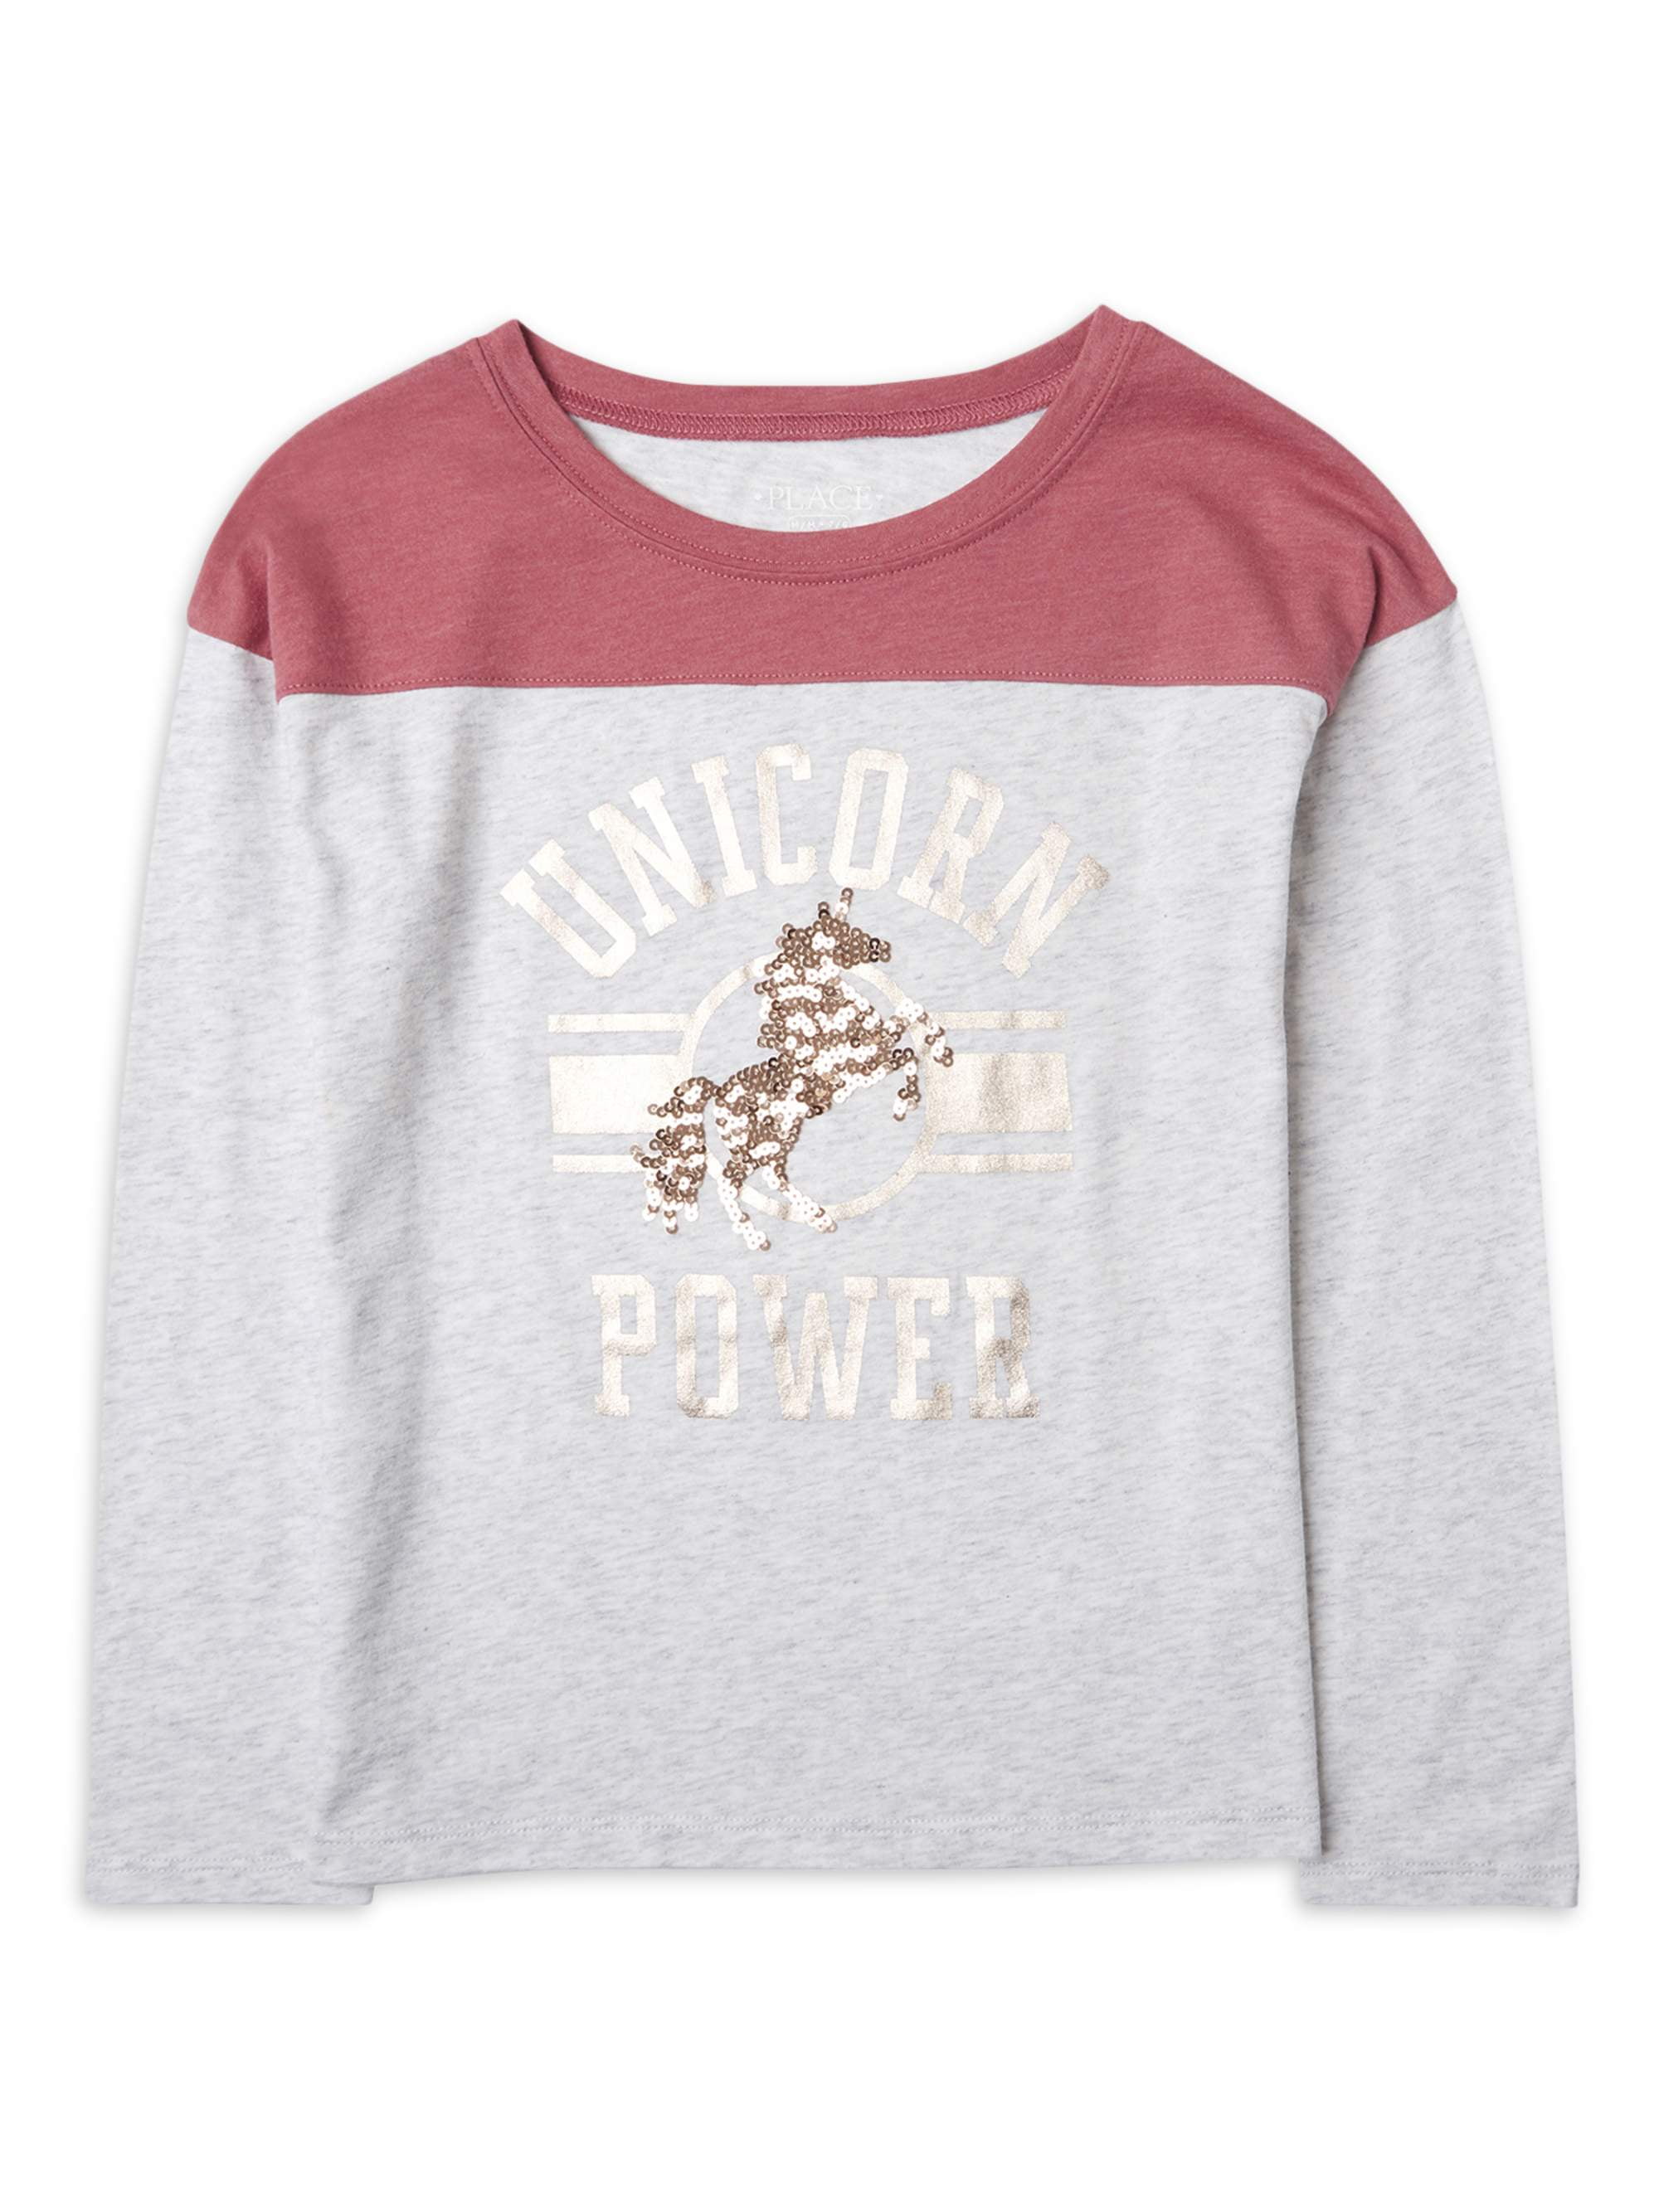 The Childrens Place Big Girls Long Sleeve Graphic Tops 